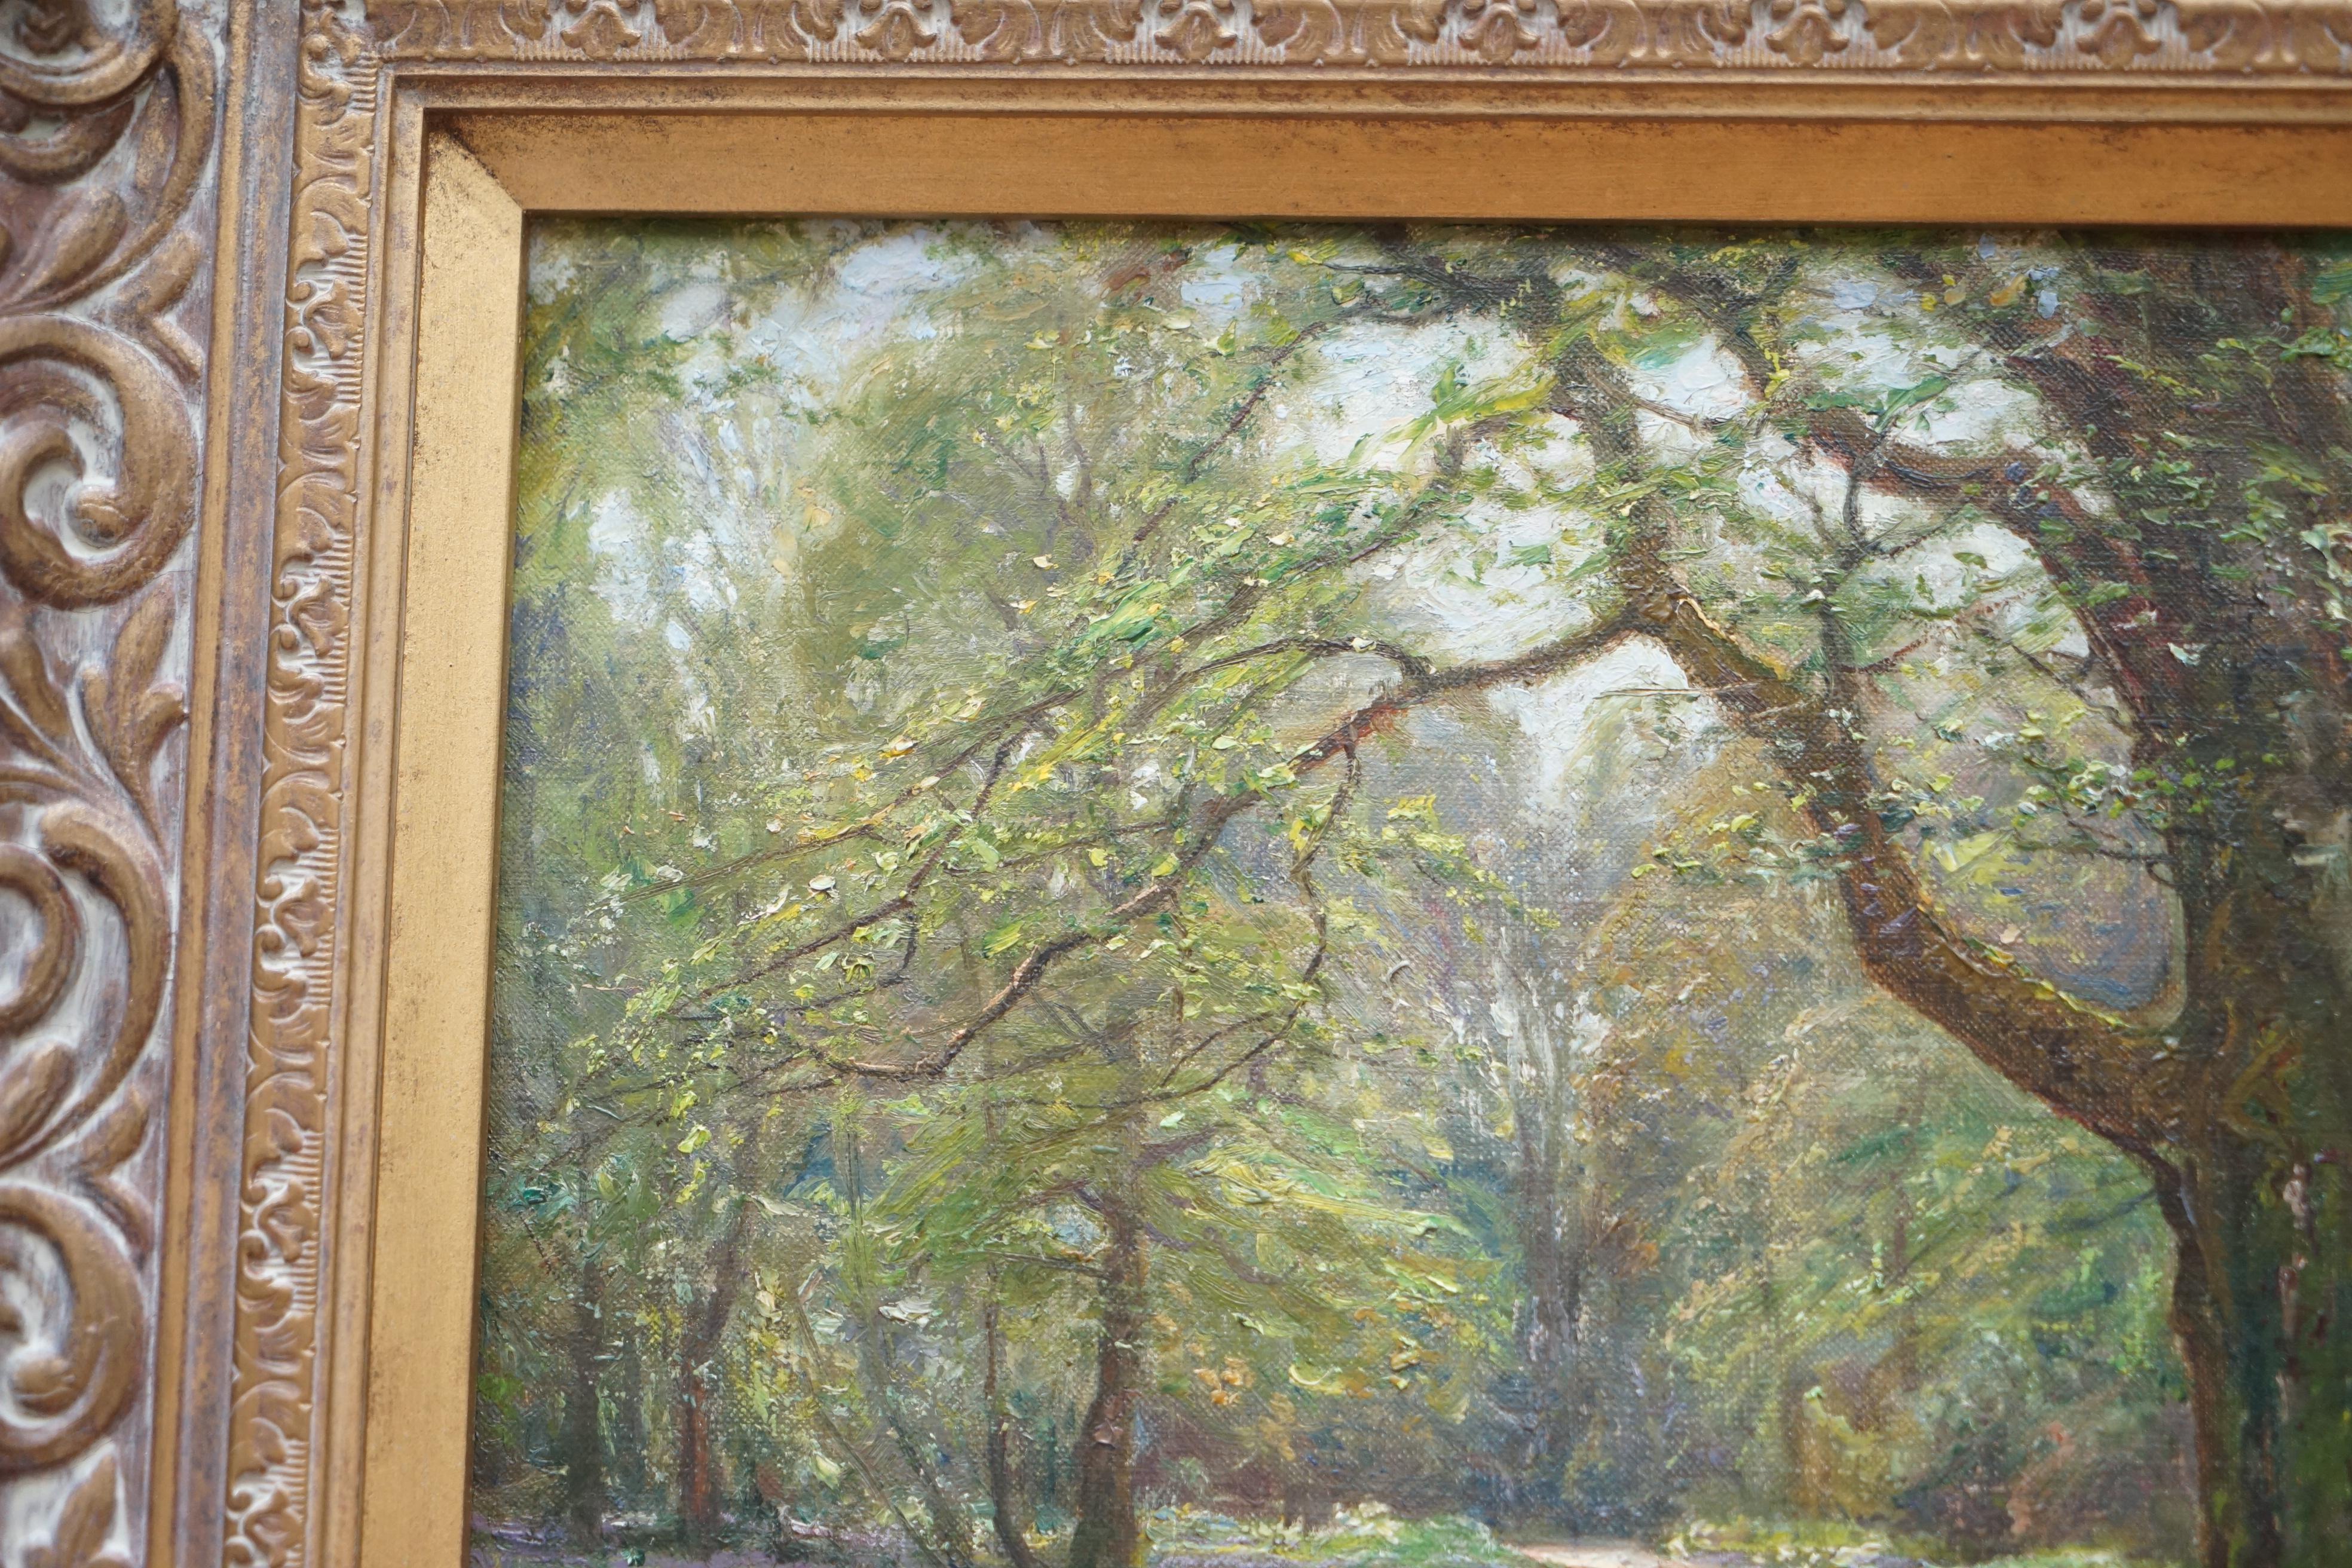 Edwardian Frederick Golden Short New Forest Bluebell Wood Signed & Dated 1912 Oil Painting For Sale